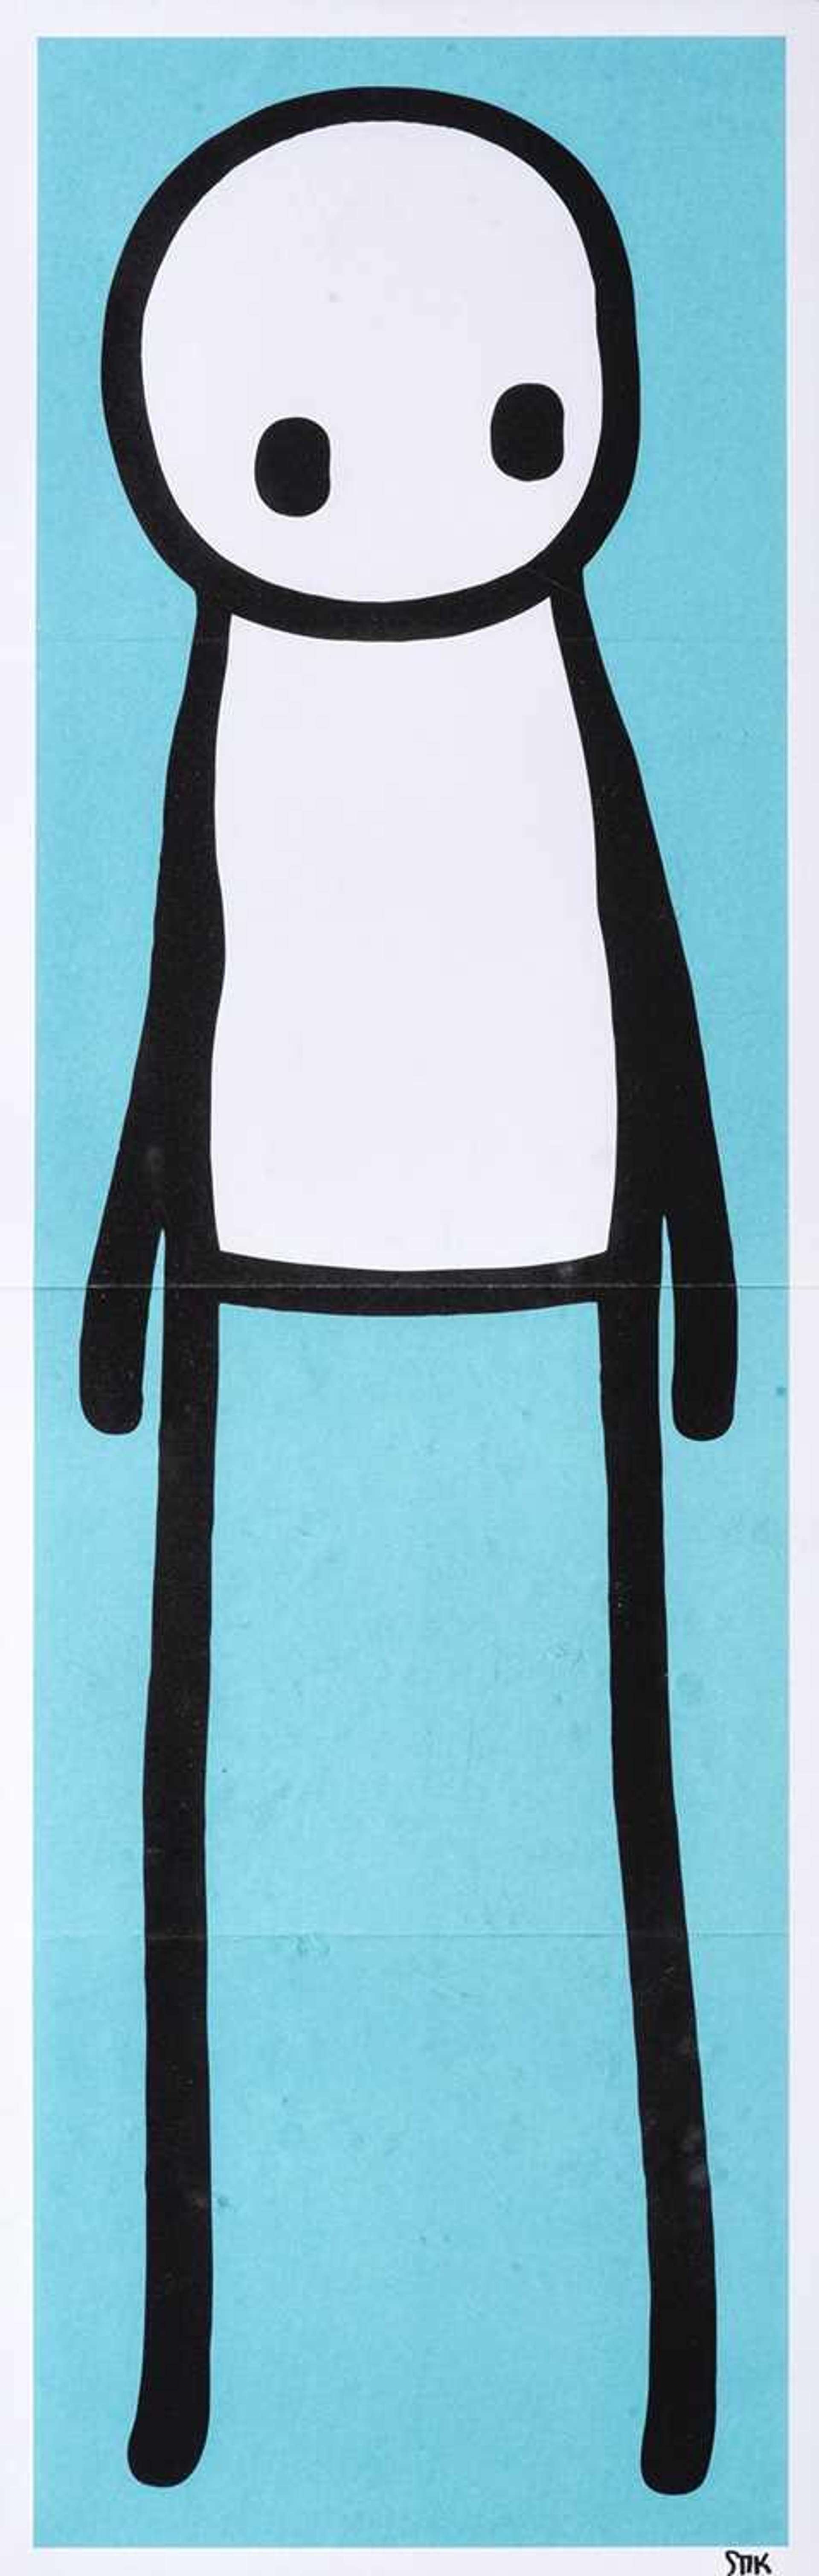 Standing Figure (silver) by Stik